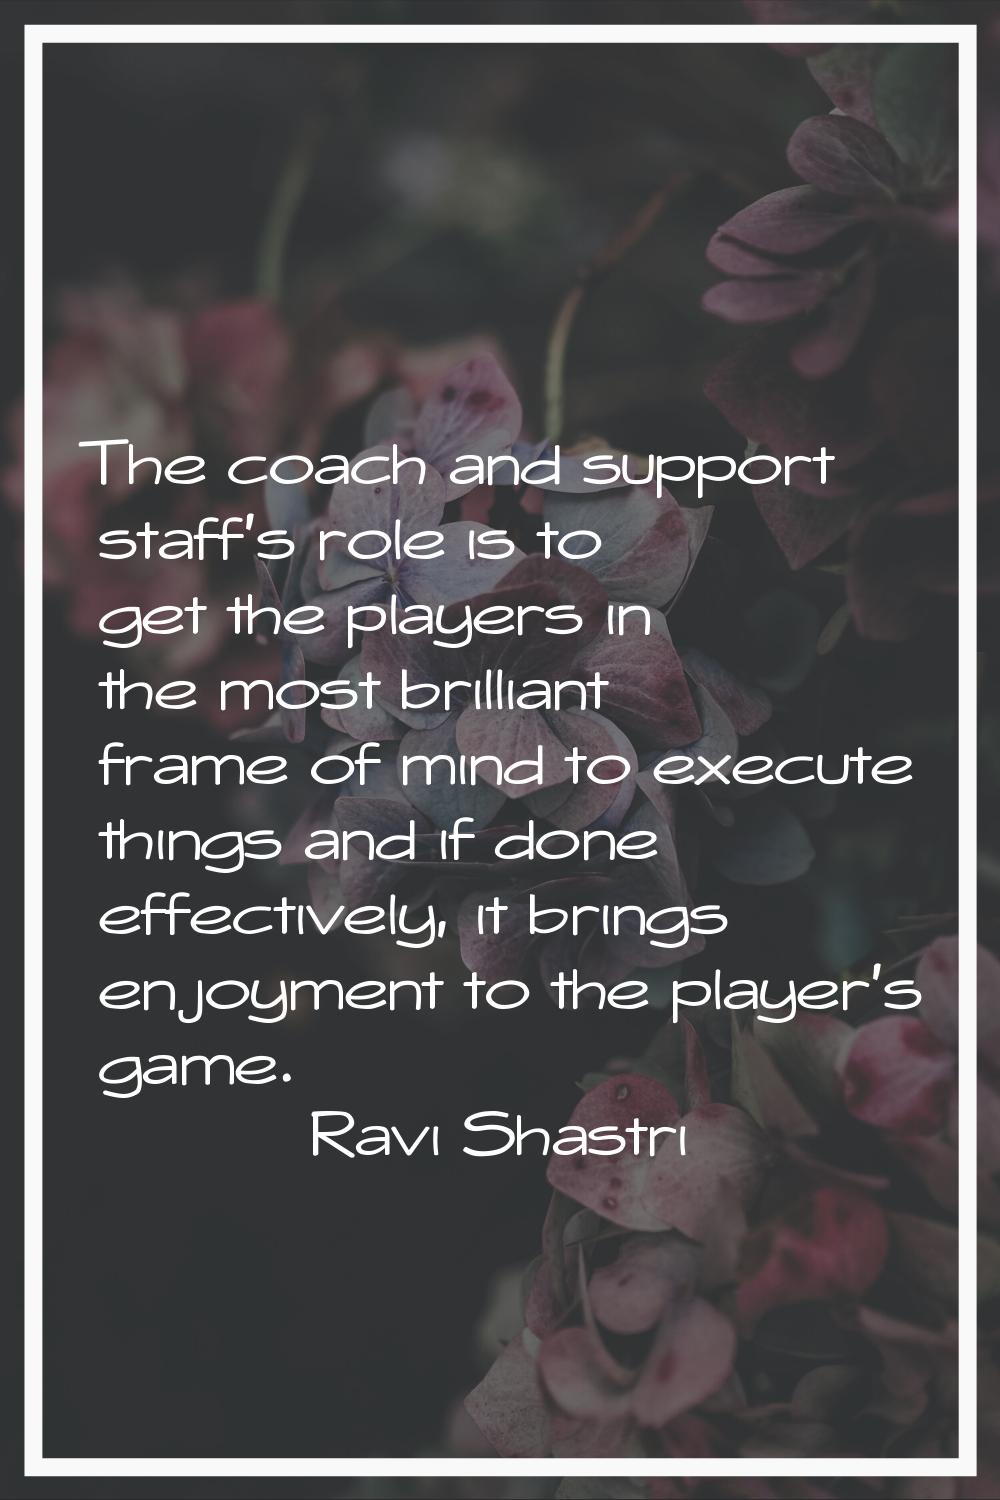 The coach and support staff's role is to get the players in the most brilliant frame of mind to exe